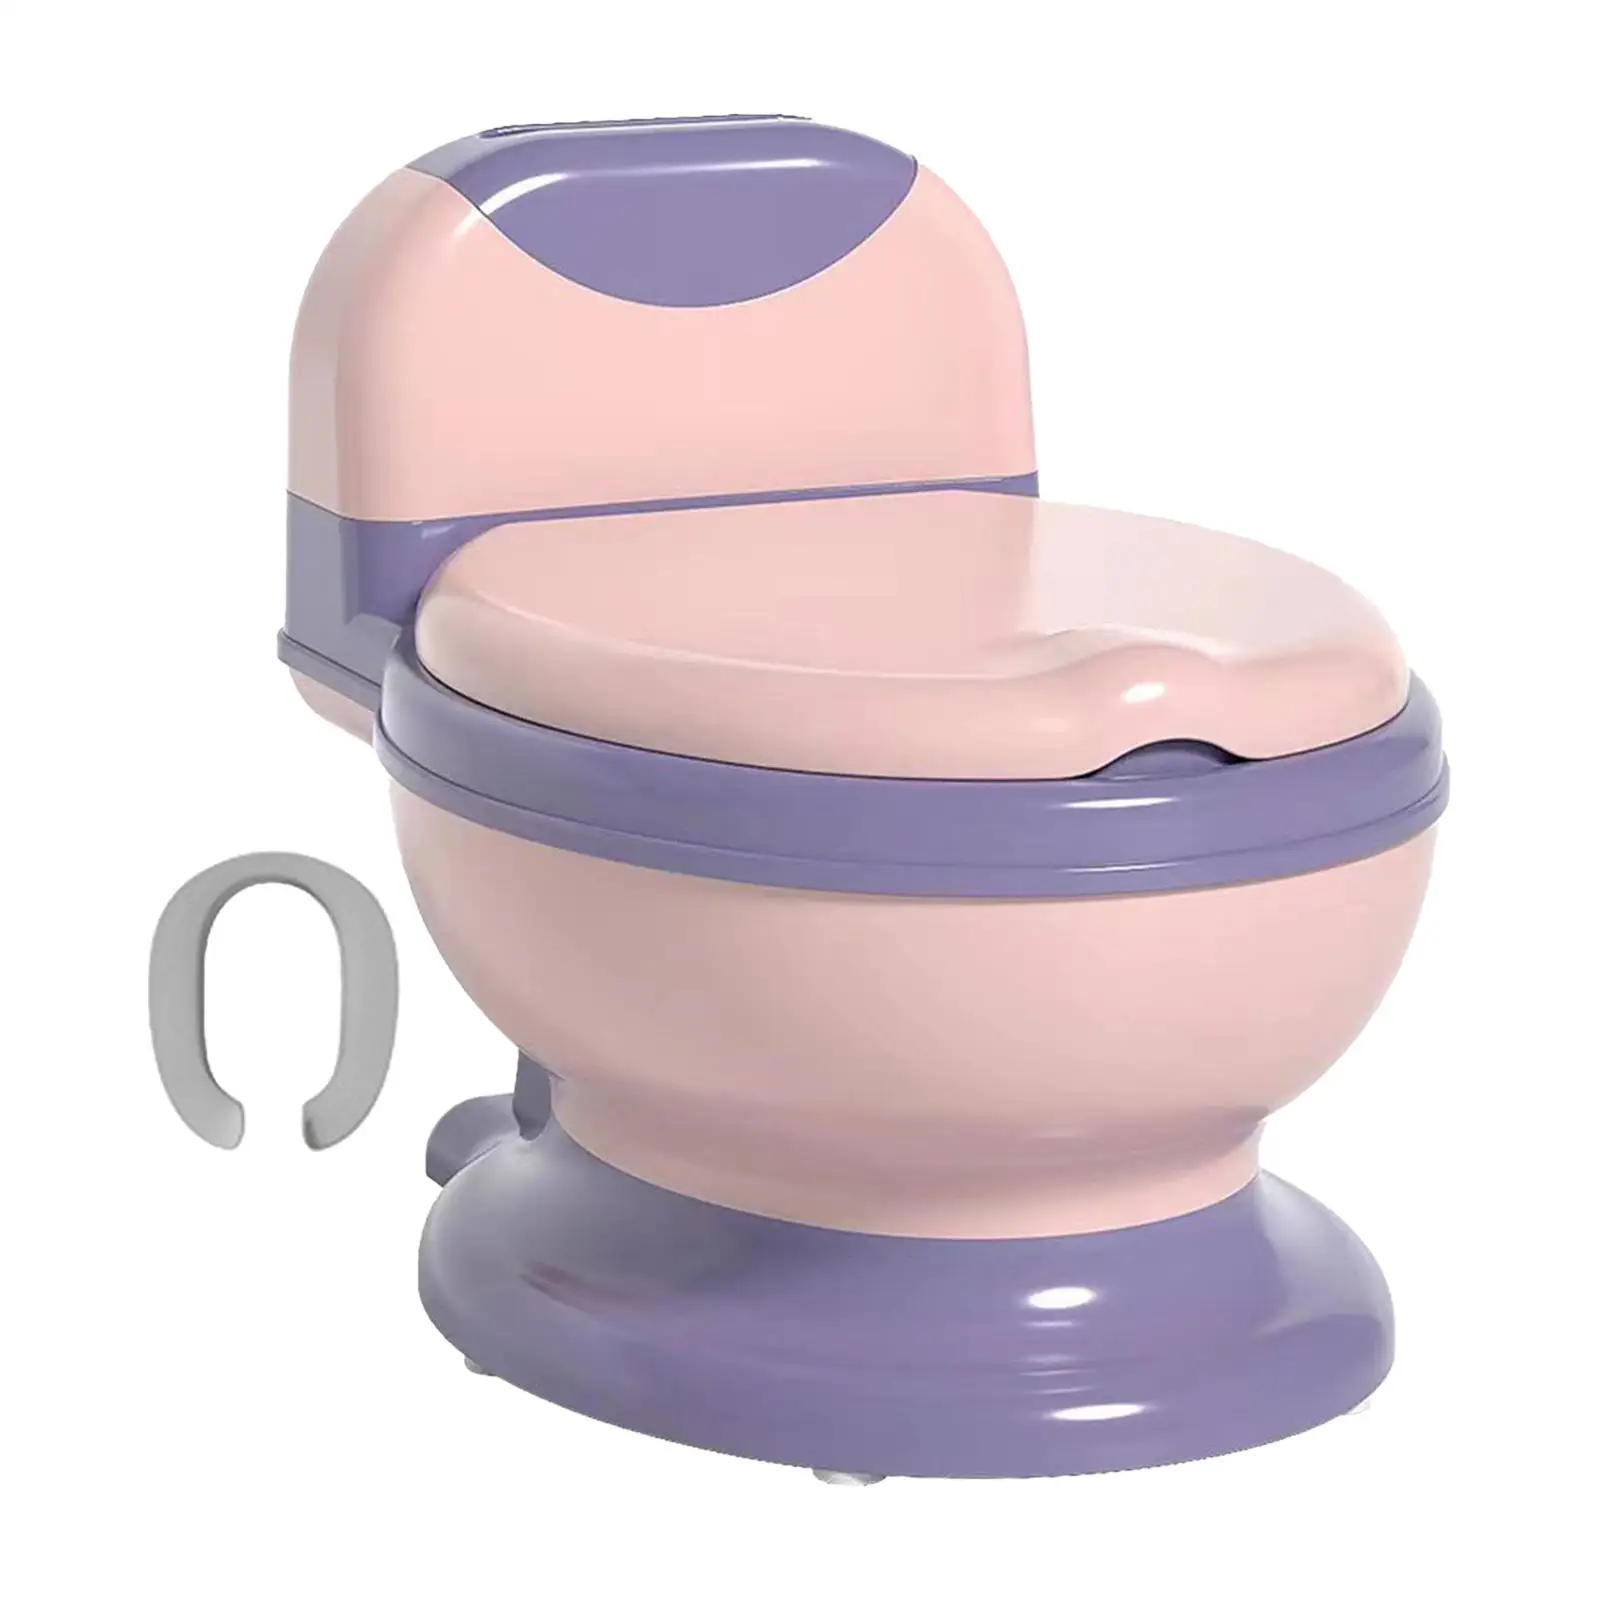 Potty Train Toilet Removable Potty Pot Portable Real Feel Potty Toddlers Potty Chair for Kids Children Toddlers Baby Girls